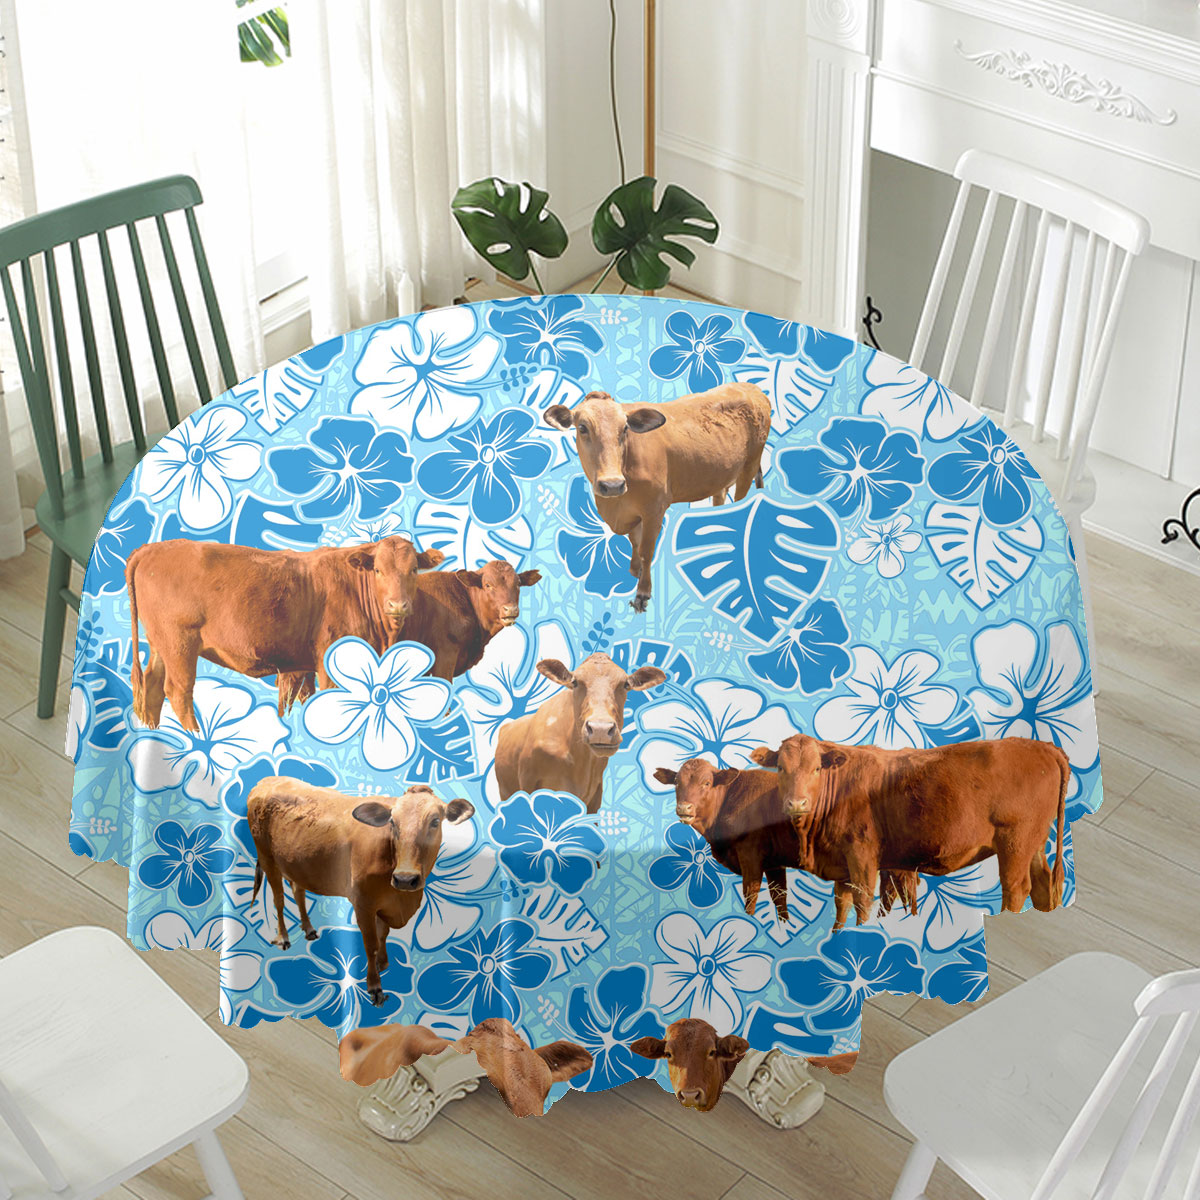 Beefmaster Blue Floral Waterproof Tablecloth